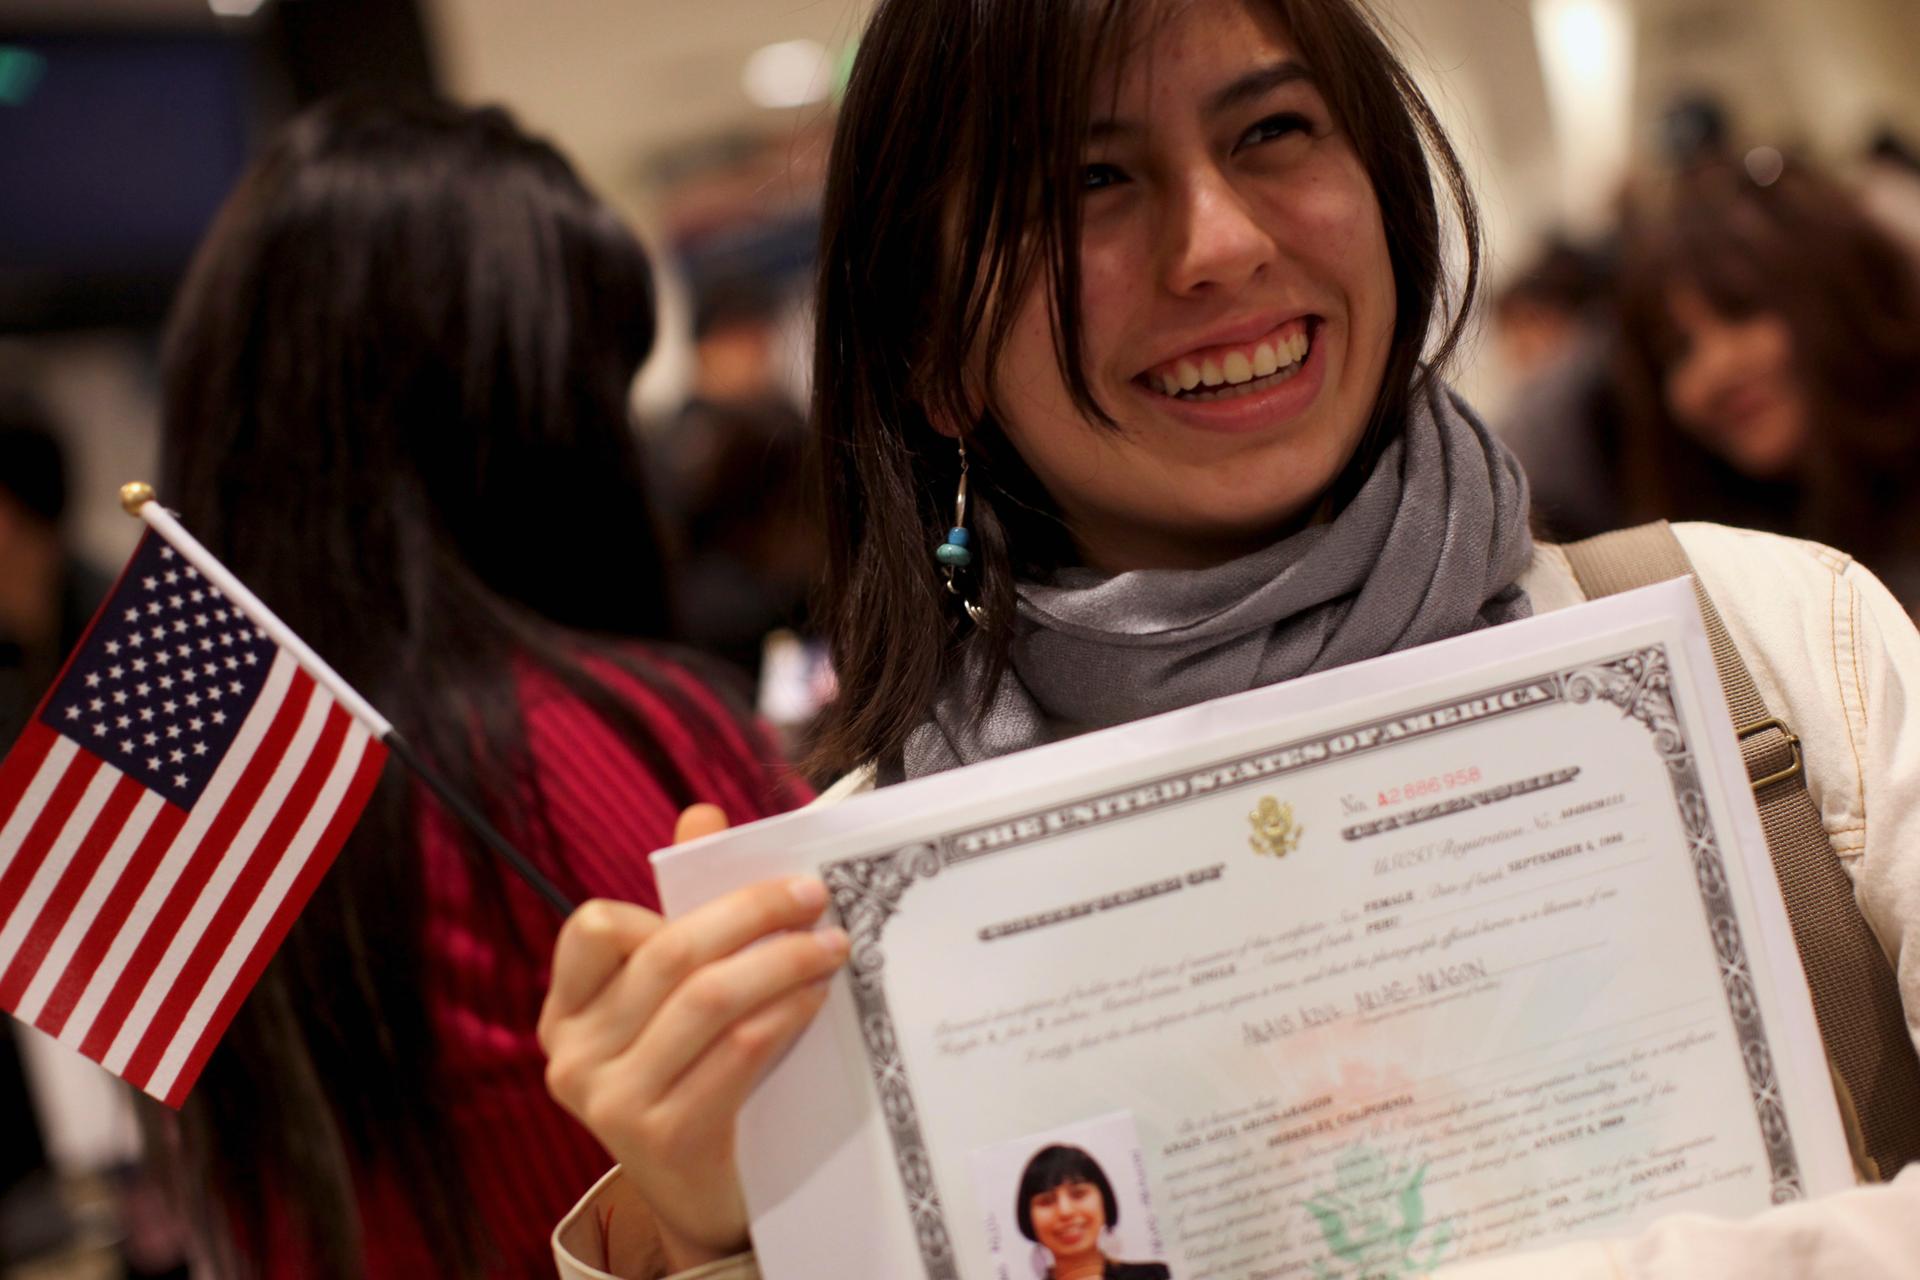 Anais Arias-Aragon poses for pictures with her certificate after receiving proof of U.S. citizenship